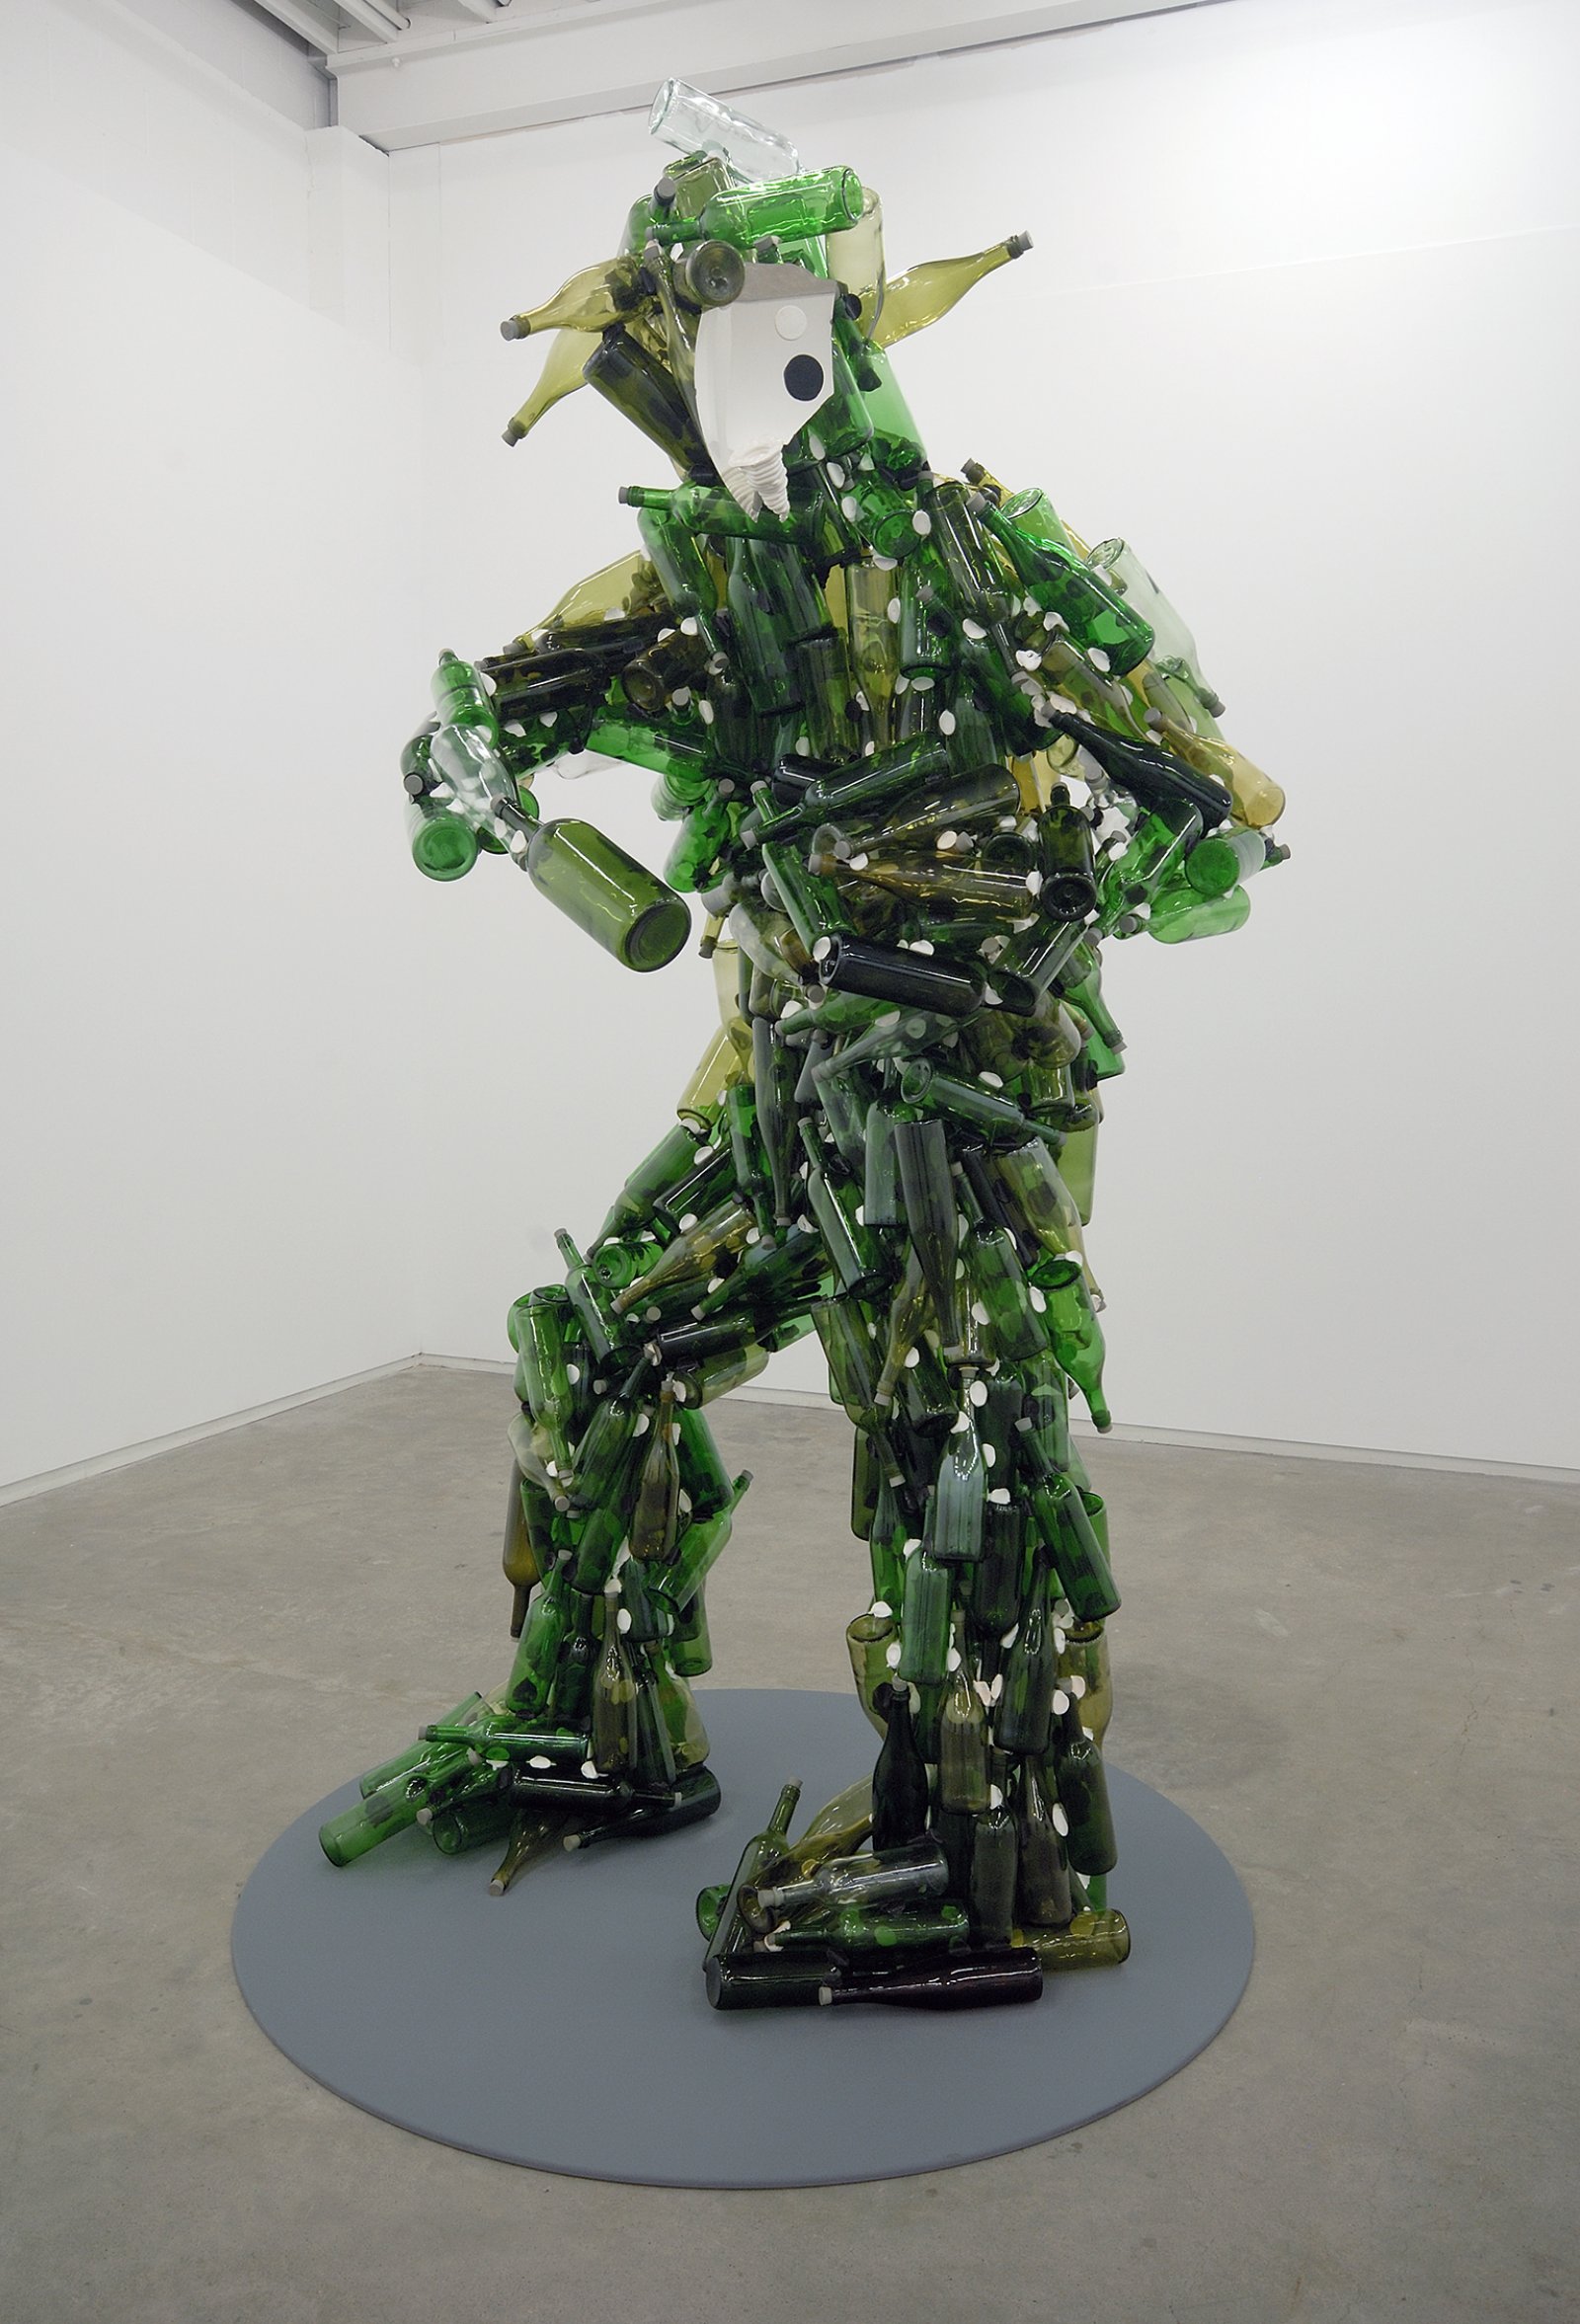 Jerry Pethick, Le Semeur/Sunlight and Flies, 1984–2002, glass bottles, silicone, rubber corks, aluminum, surveillance mirror, 95 x 48 x 43 in. (240 x 122 x 110 cm)   by Jerry Pethick